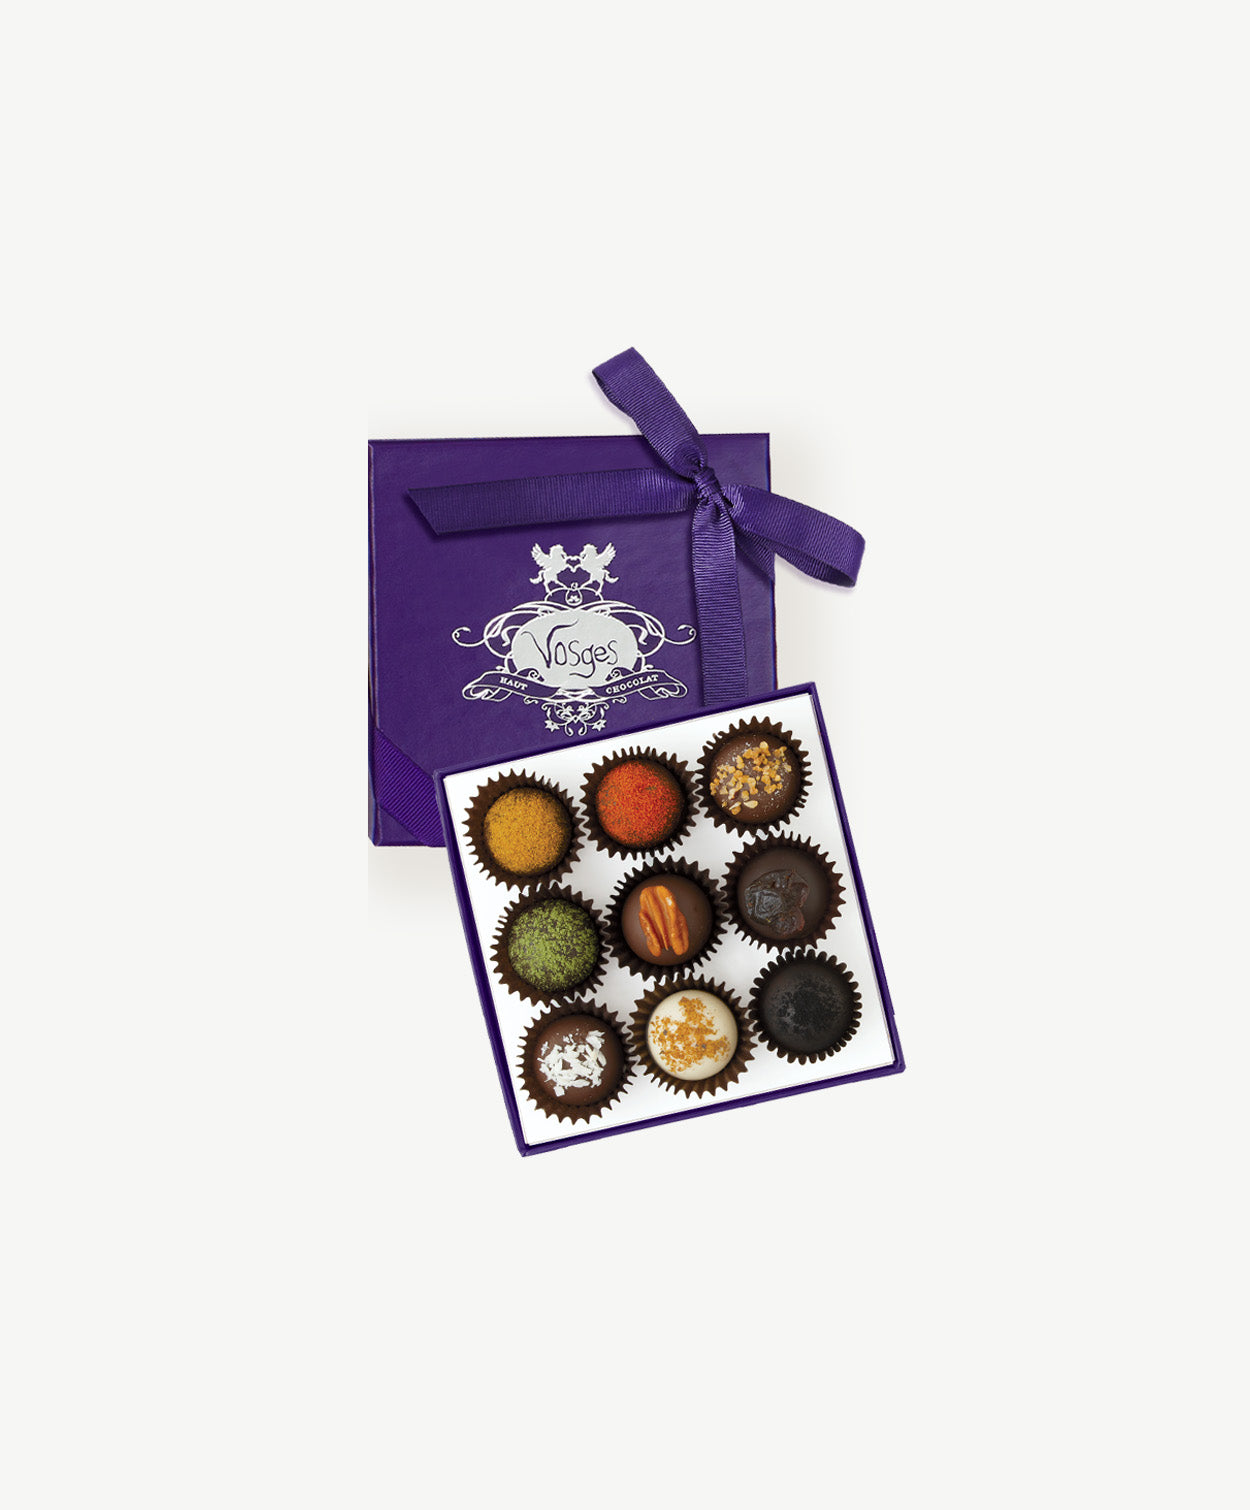 Open purple chocolate box of Vosges haut-chocolat exotic truffles adorned in brightly colored spices and toppings tied with a purple ribbon bow on a white background.